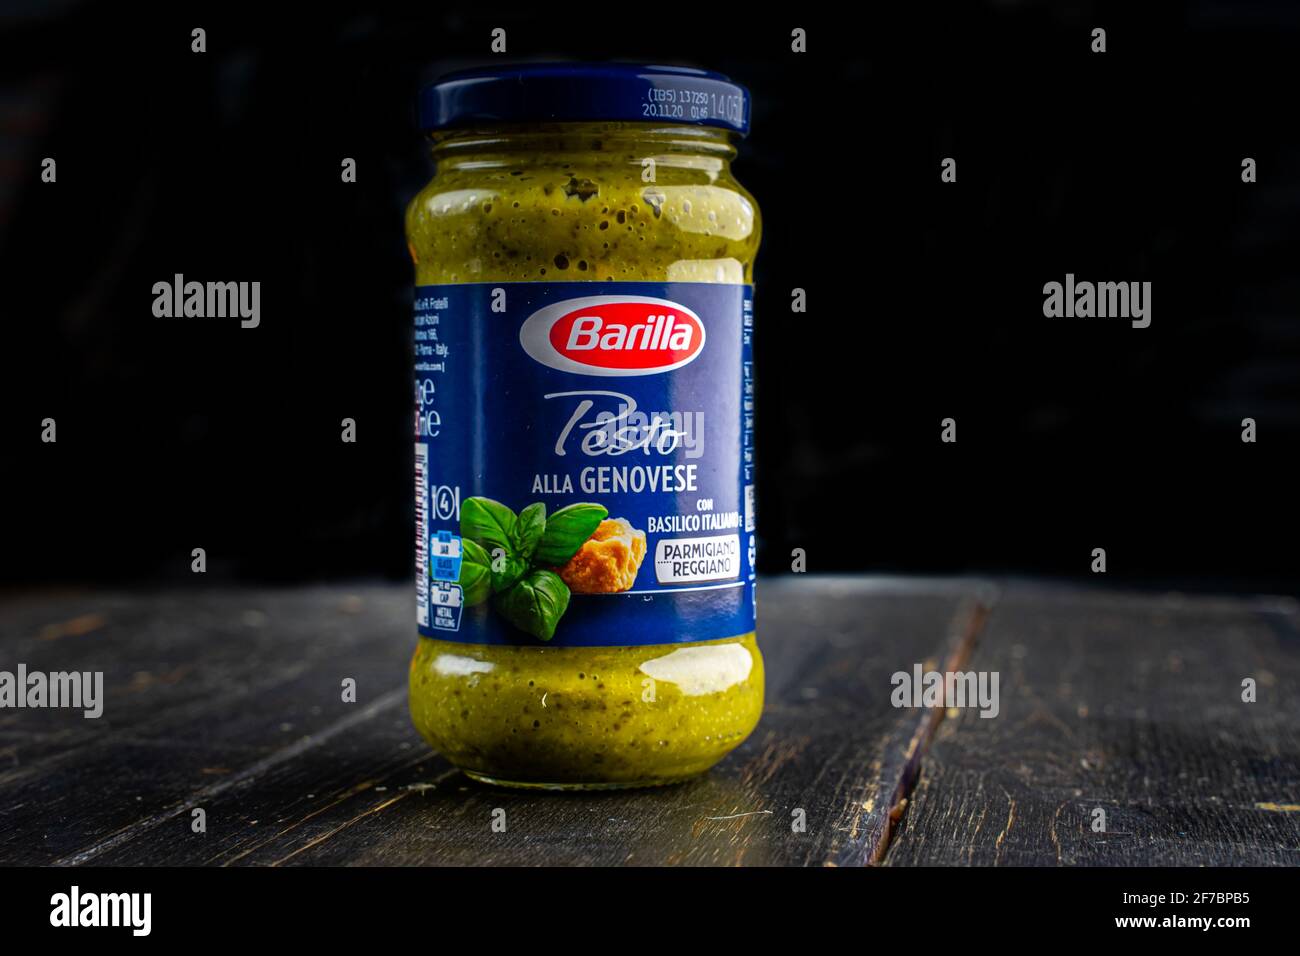 Barilla pesto sauce Alla Genovese on glass jar for home cooking food Stock  Photo - Alamy